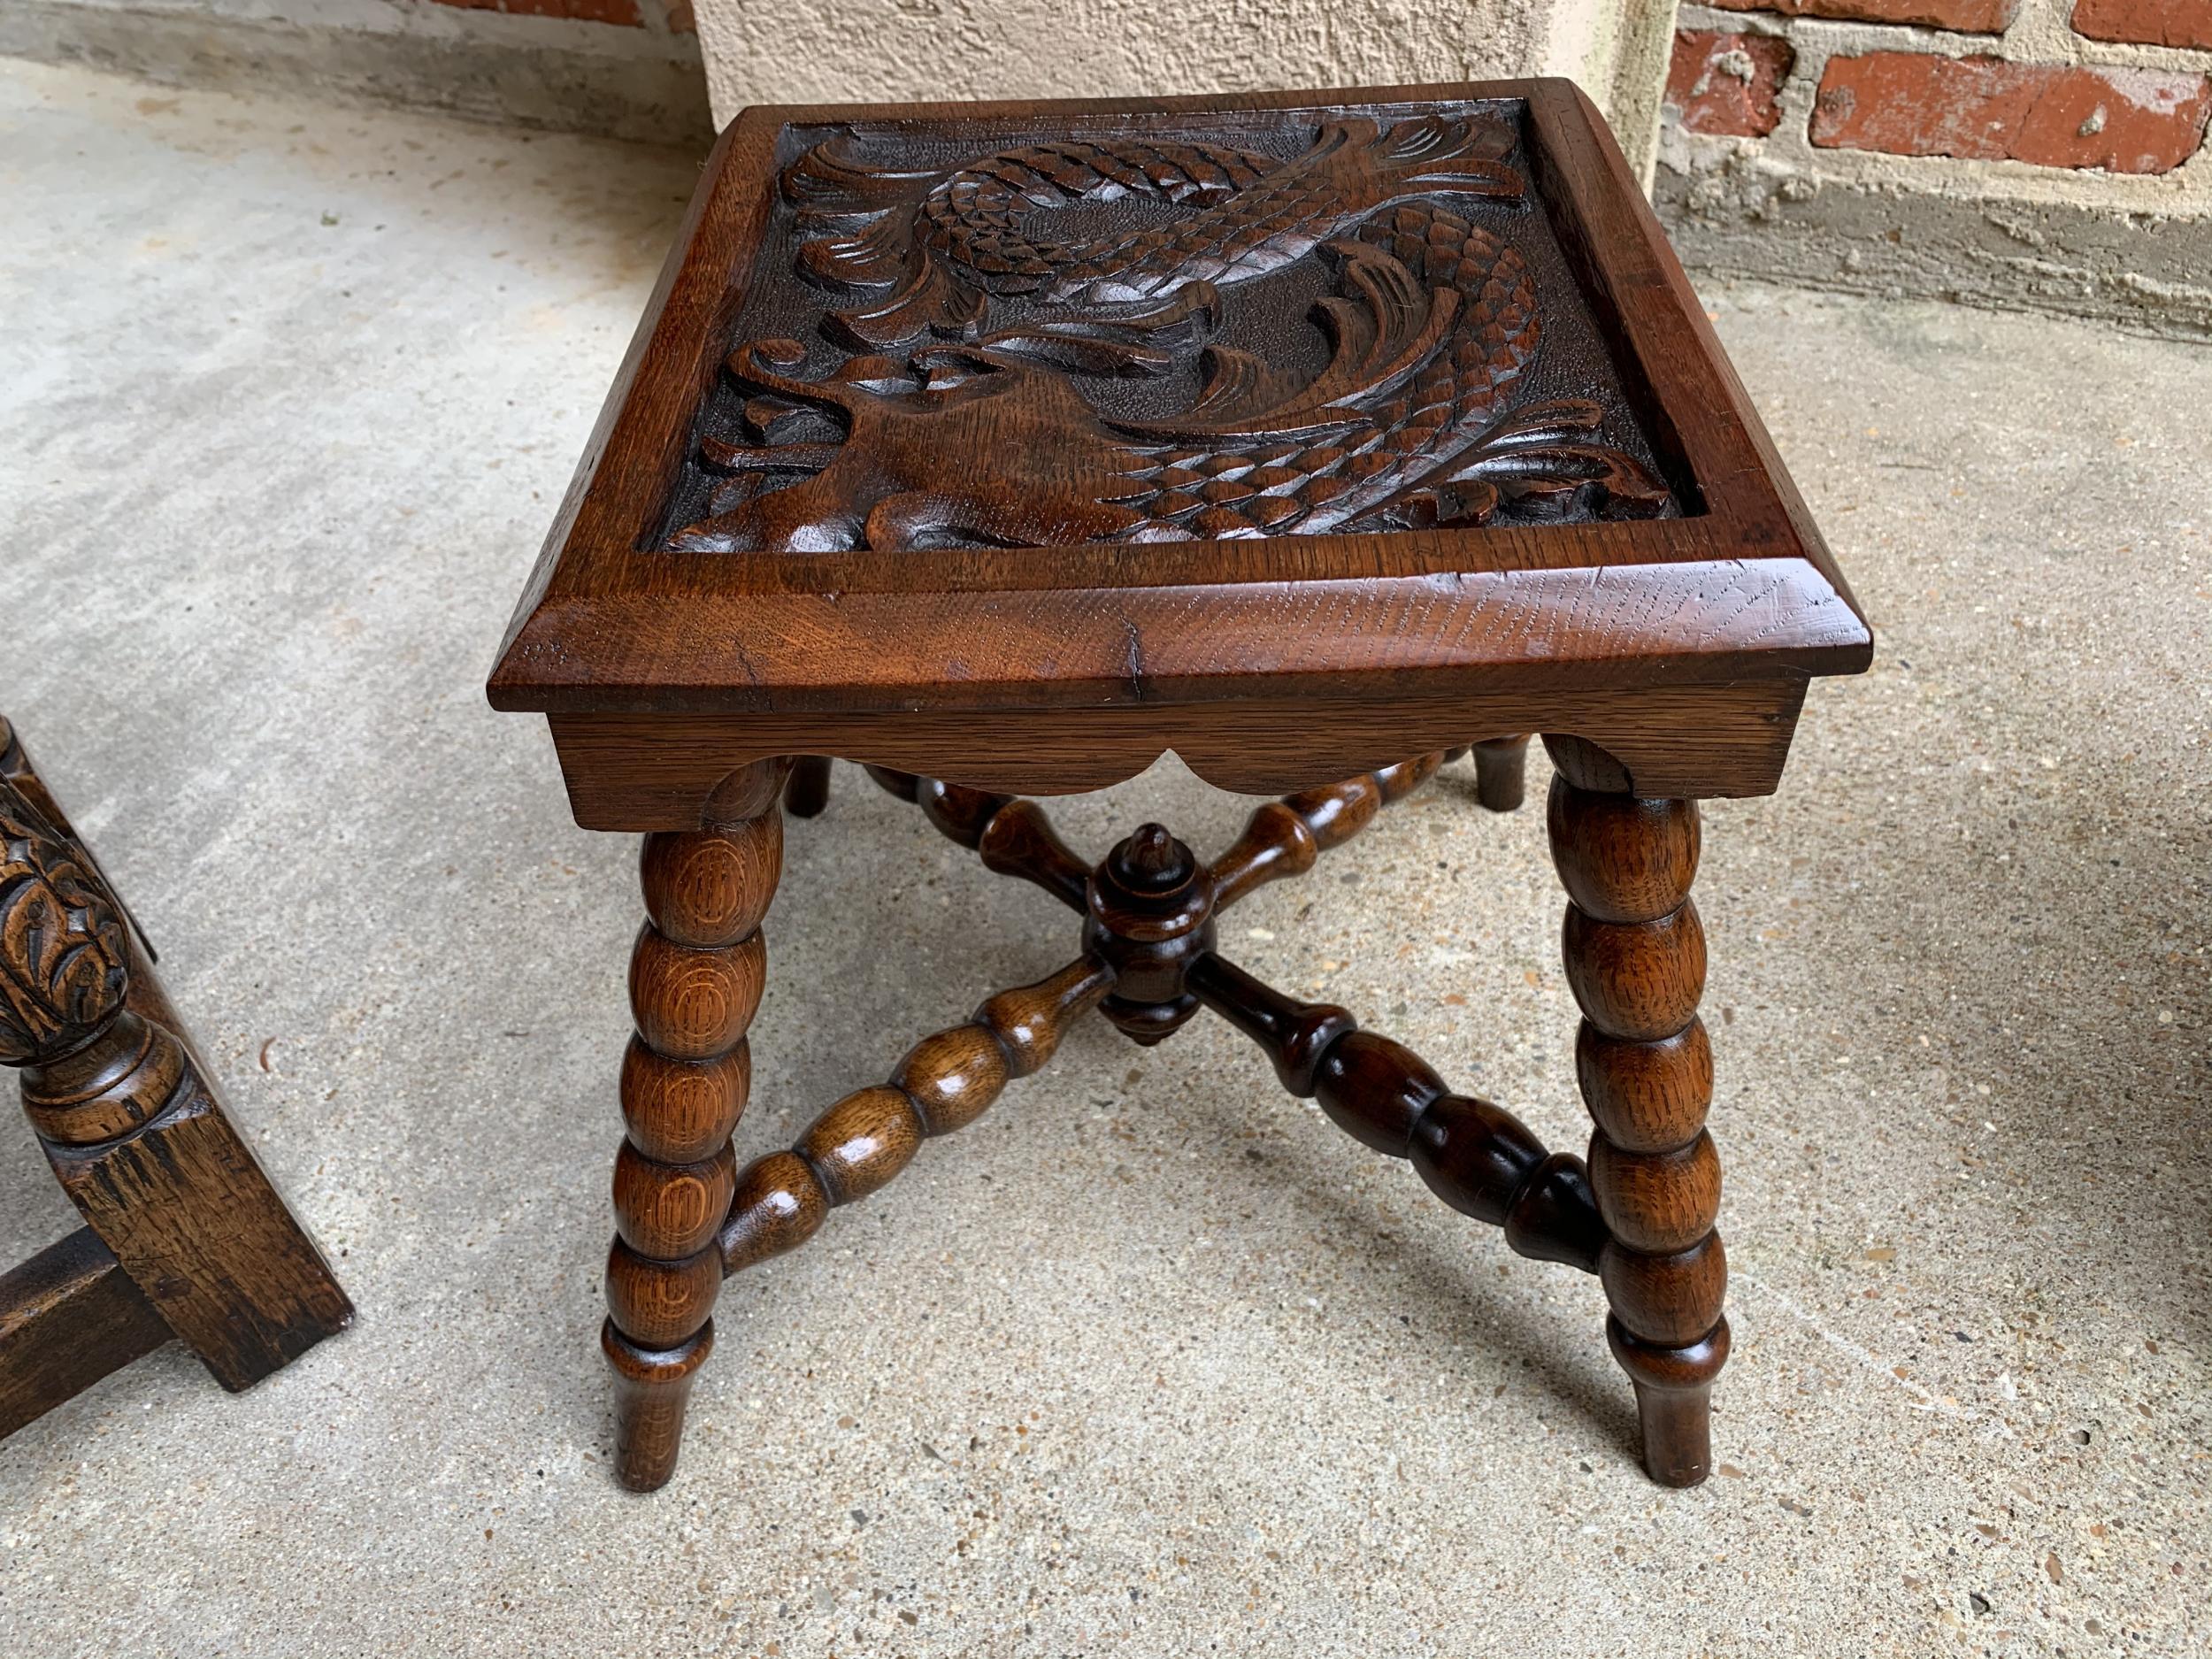 Antique English carved bench stool end table square display stand renaissance

~Direct from England~
~One of several outstanding small carved antique English benches/stools from our latest container!~
~This distinctive stool has a stunning, relief